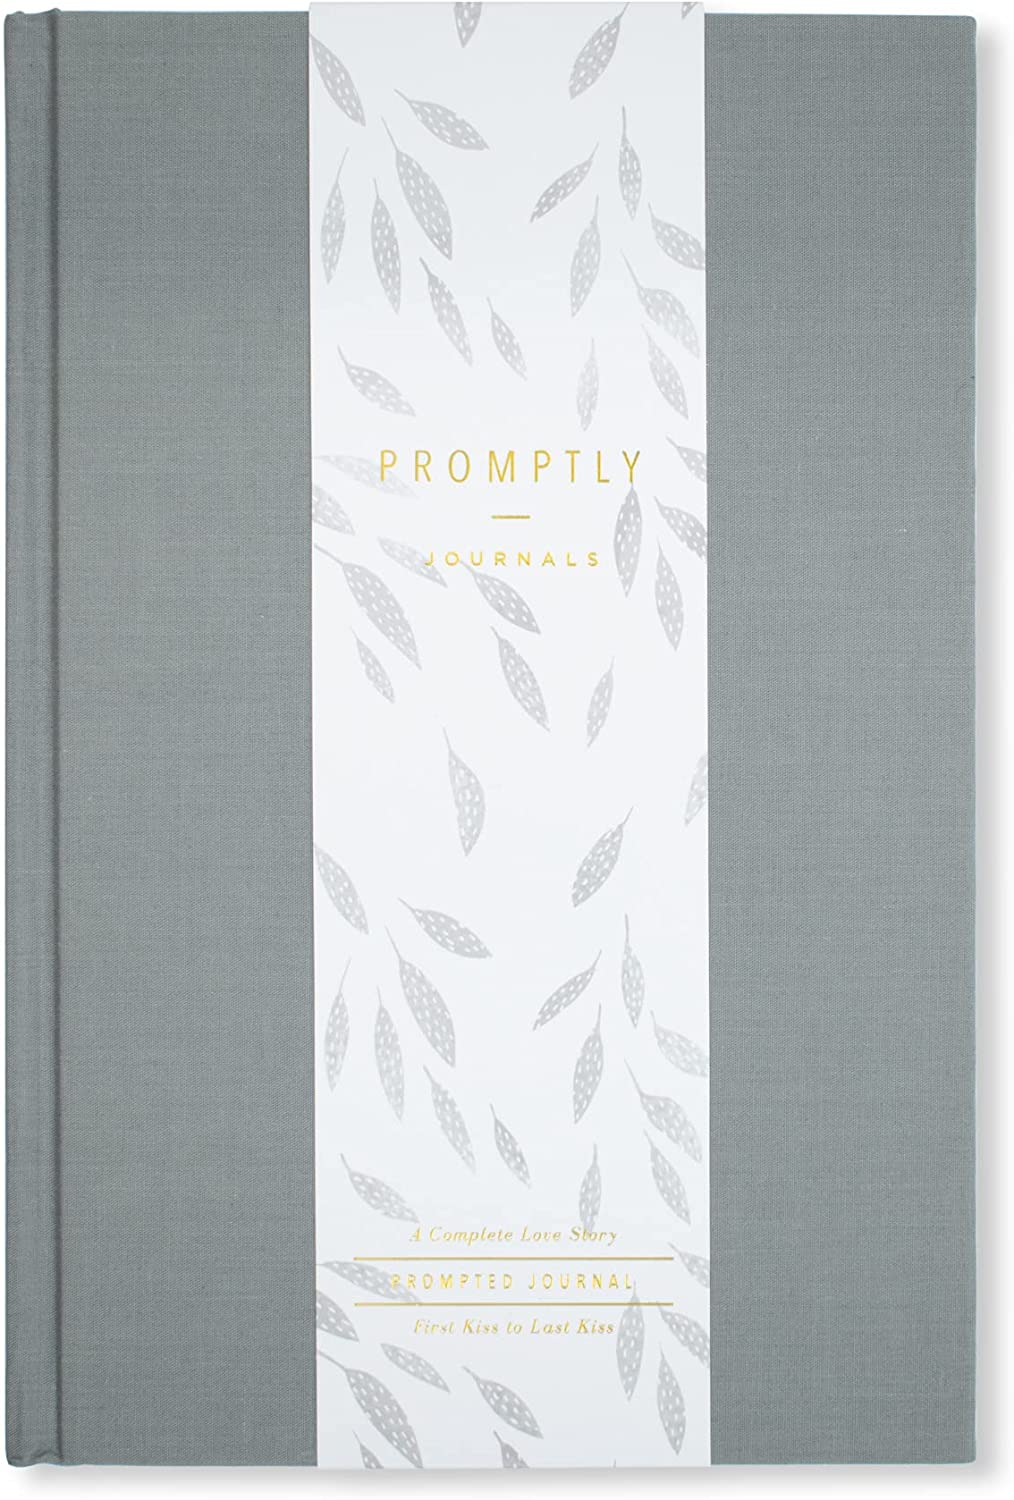 Promptly Journals, A Couples Love Story (Grey) - Prompted Relationship and Marriage Journal, Guided Journal that Covers Dating to 70th Wedding Anniversary by Promptly Journal Store on Amazon